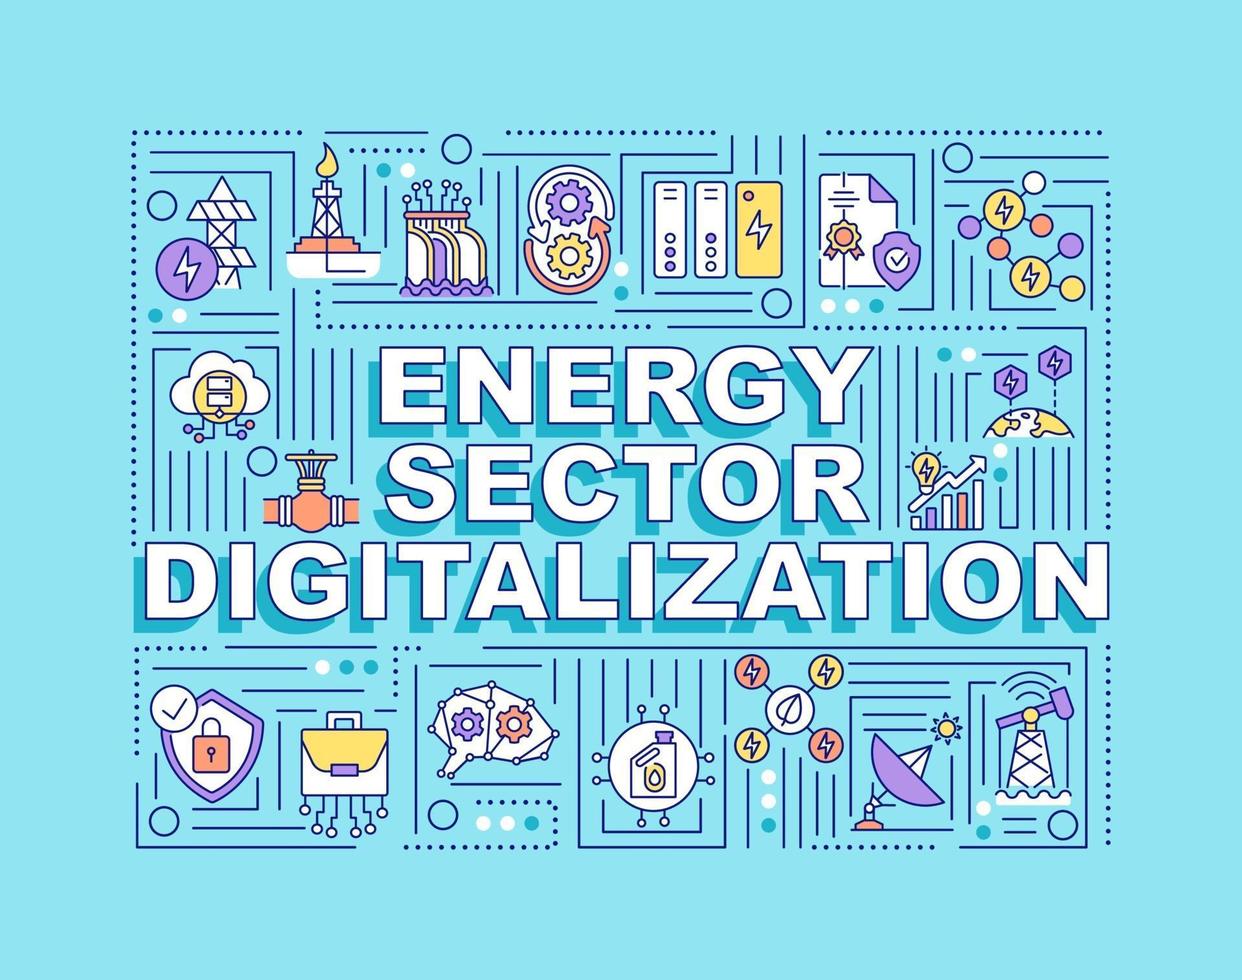 Energy sector digitalization word concepts banner vector